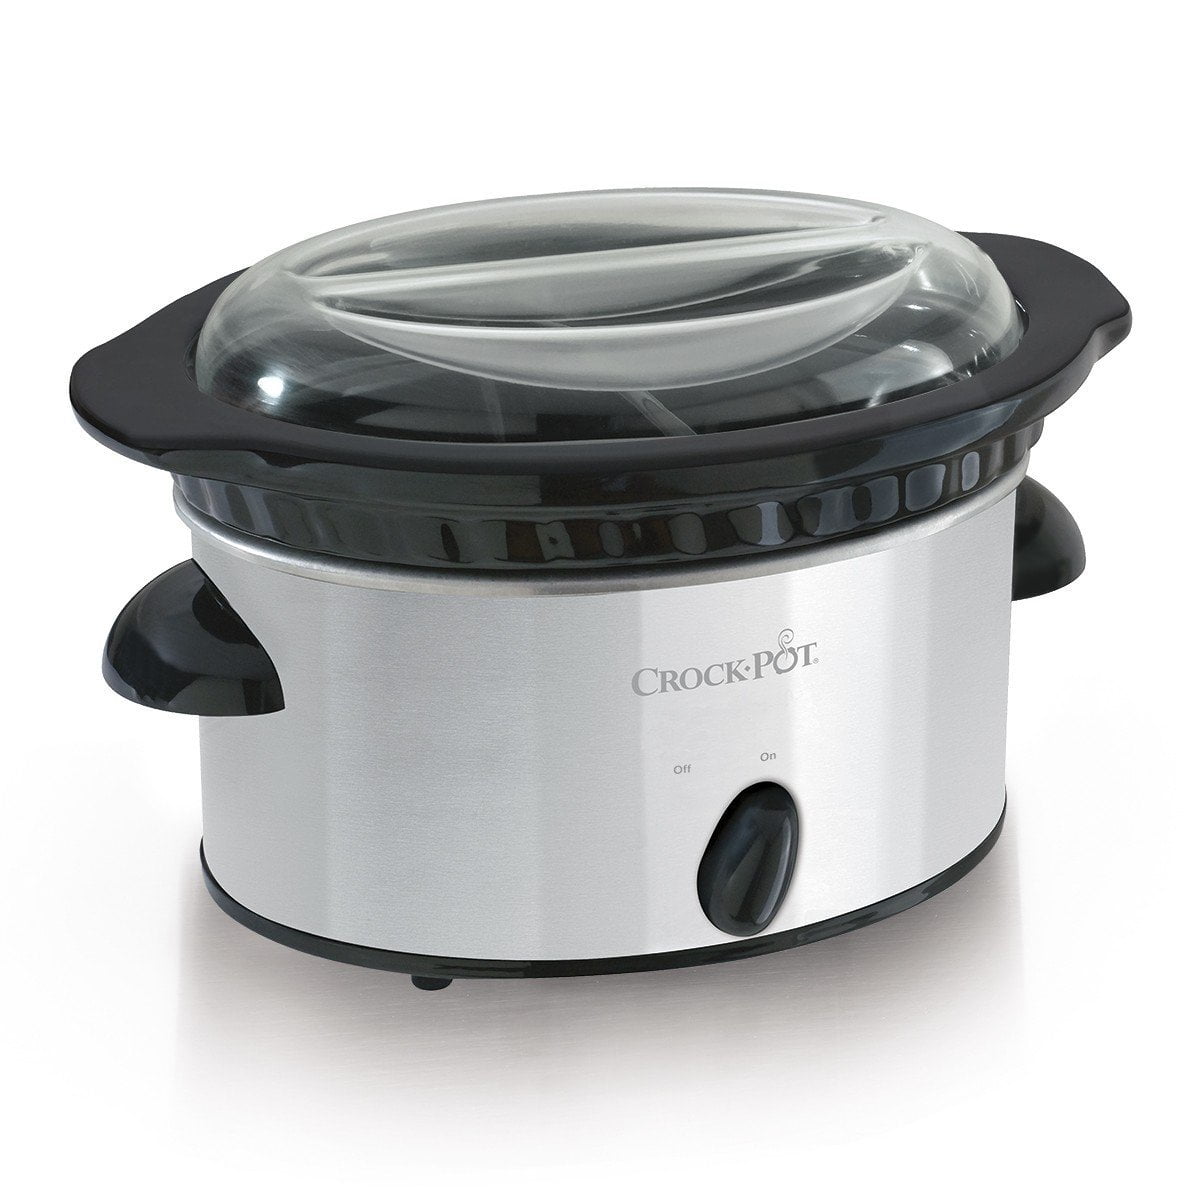 Crock-Pot Double Dipper Slow Cooker, Stainless Steel 